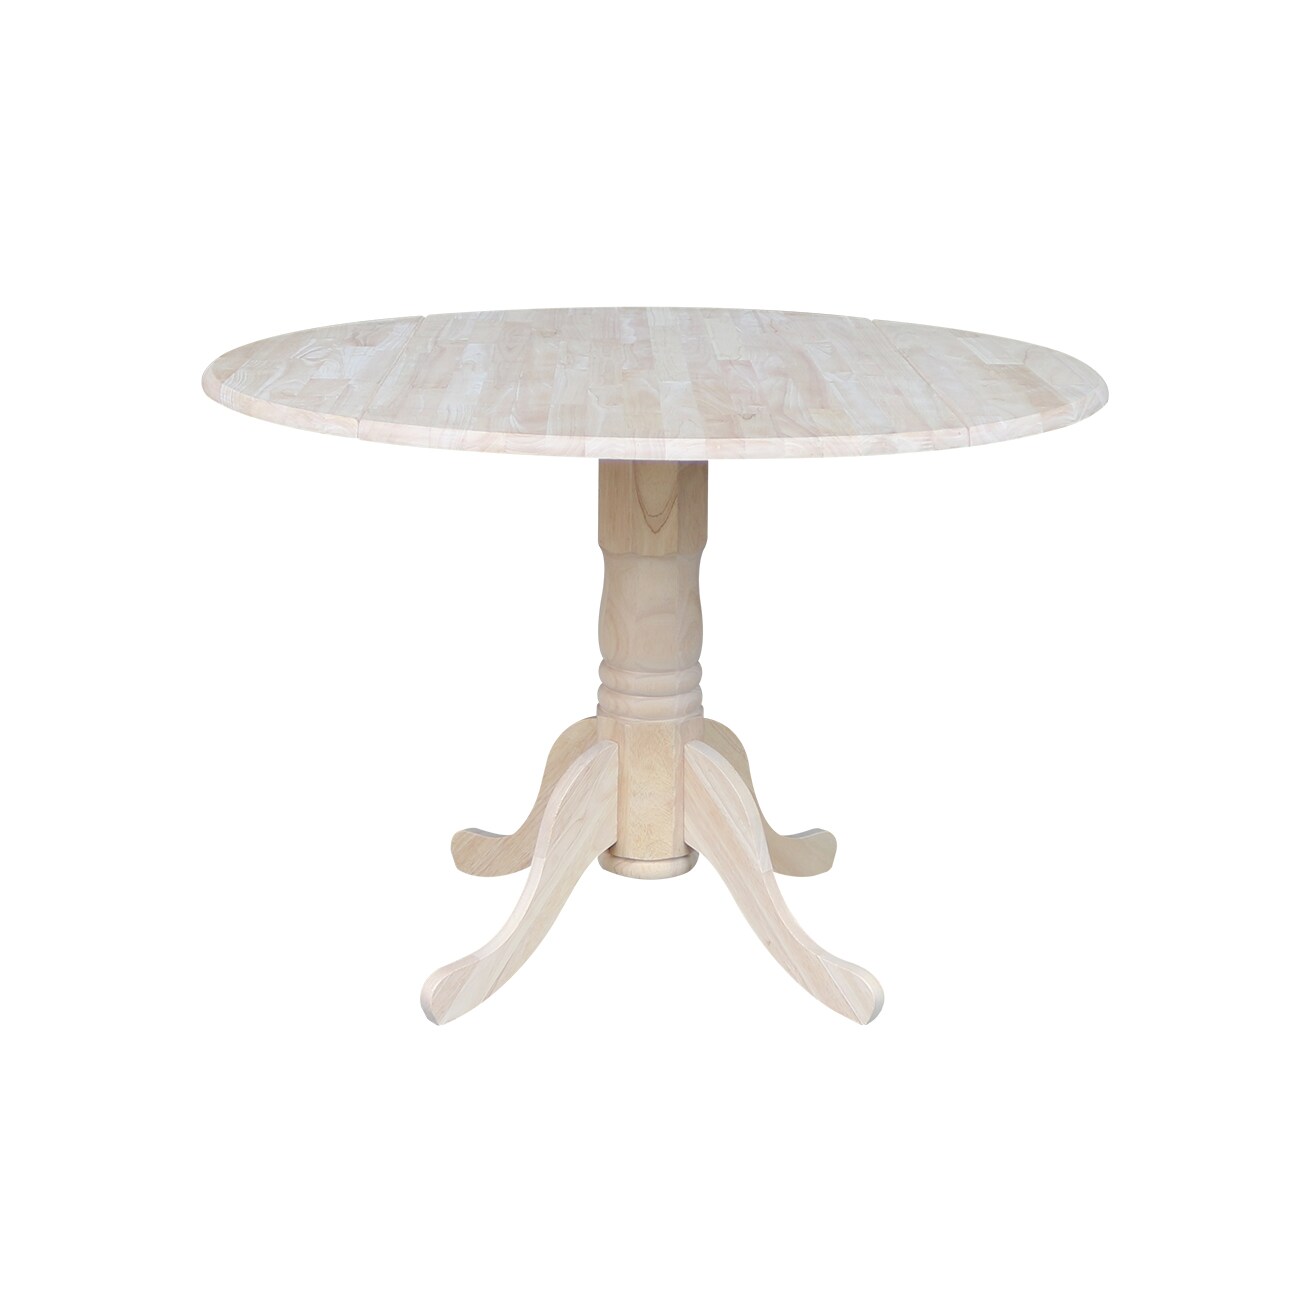 Details about   Wallace & Bay Mccarty 42" Round Dining Table with Drop Leaf in White 